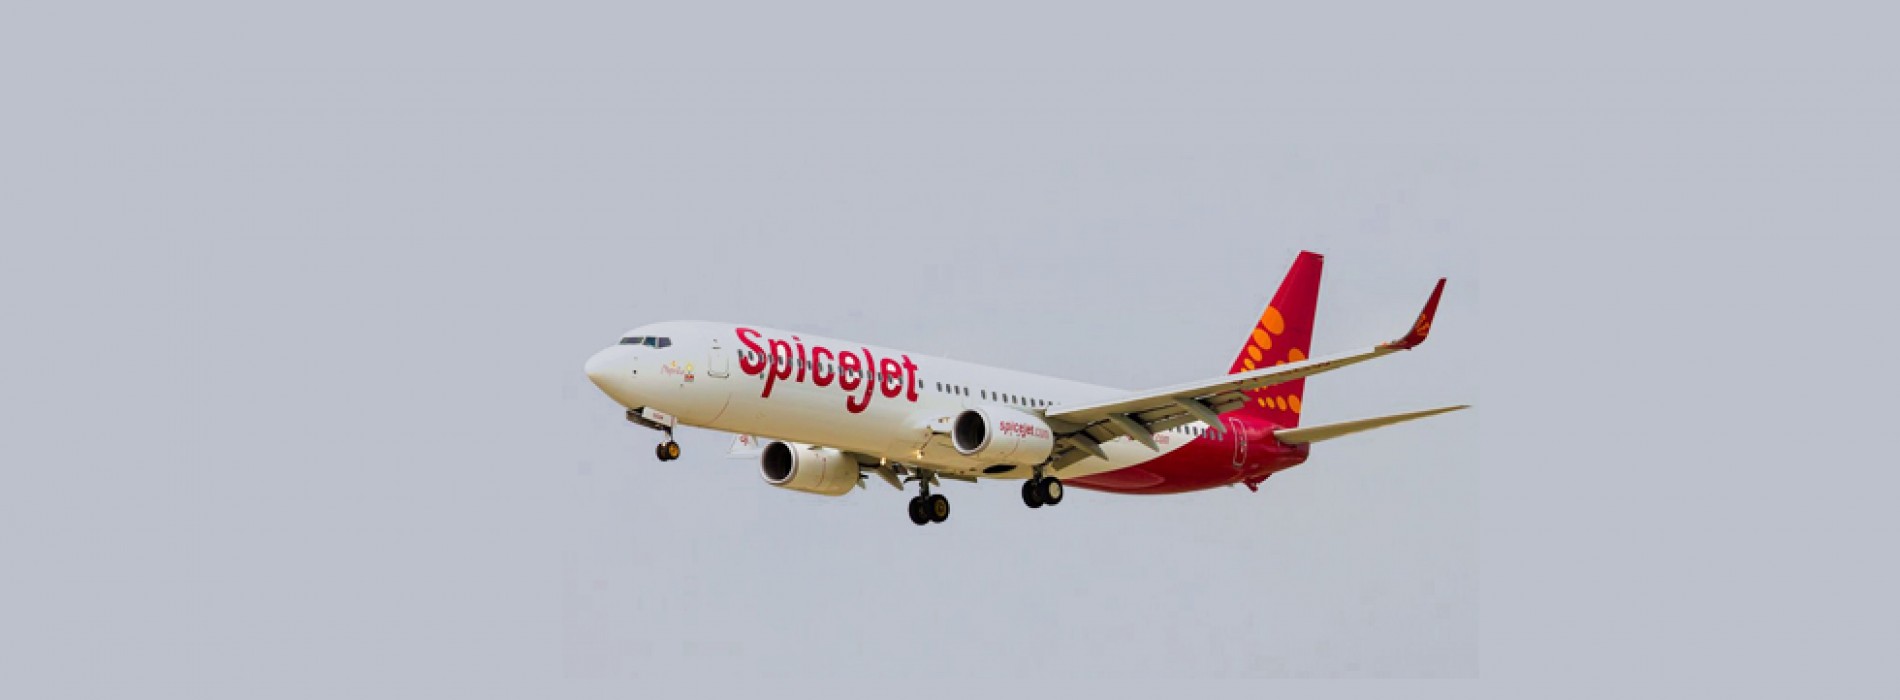 SpiceJet announces 12th anniversary sale, offers tickets starting Rs 12 on all routes